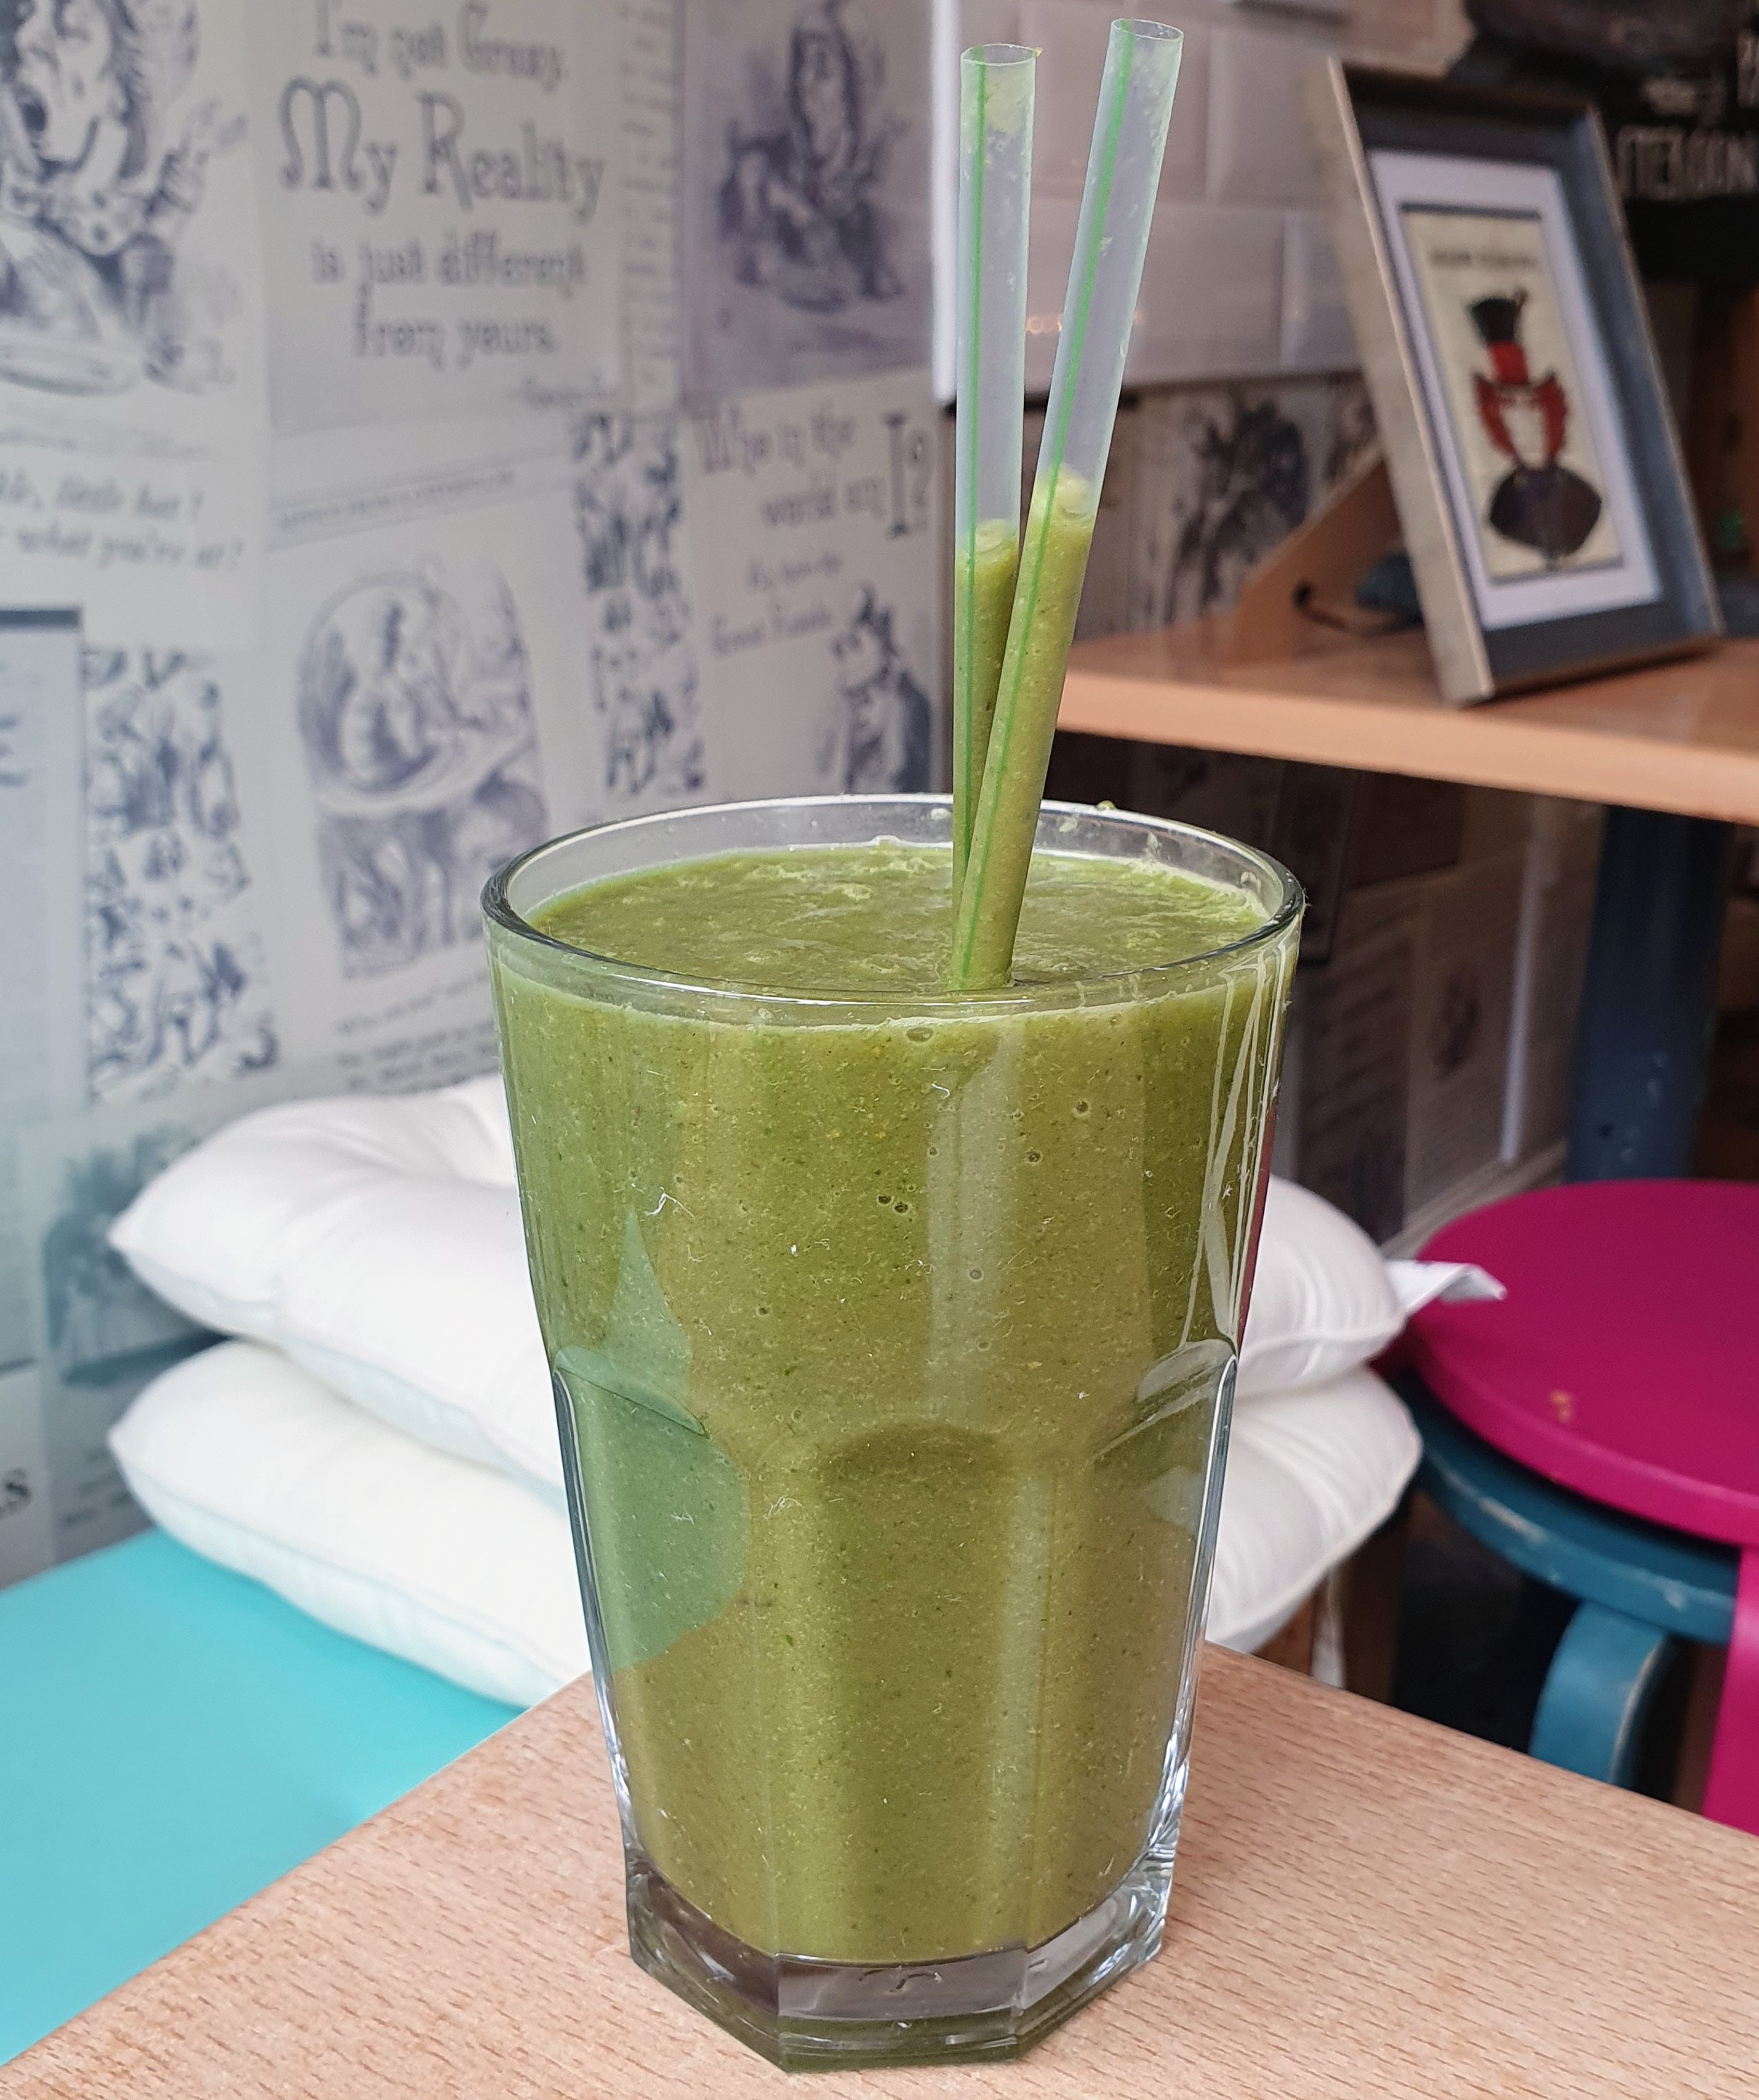 Super Greens smoothie at Hatters, an Alice in Wonderland themed cafe in Leek, Stoke-on-Trent